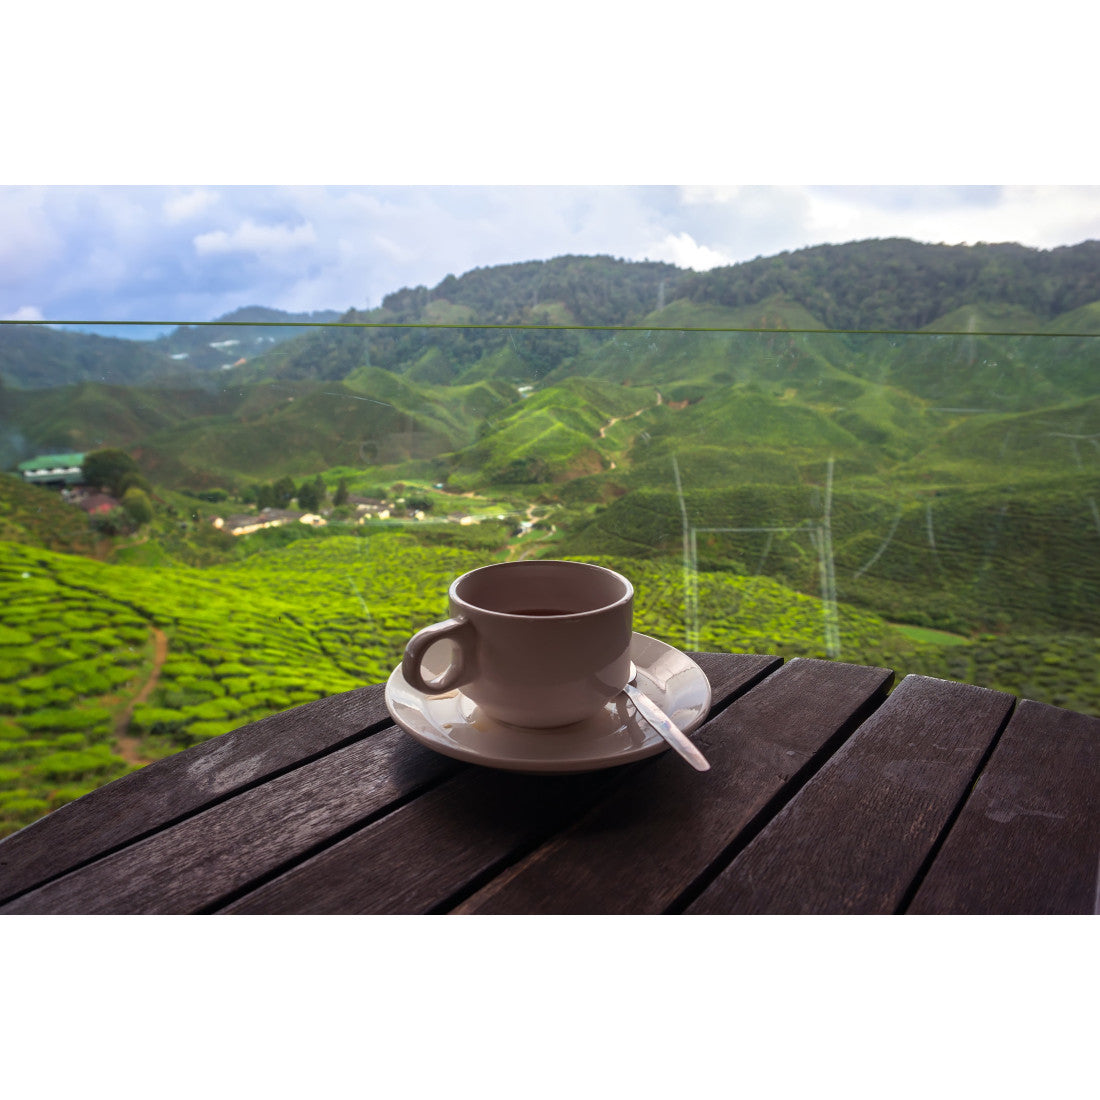 Cup of steaming GanoCelebrate Rooibos tea on a rustic wood plank table overlooking fields of green crops and rolling green hills. A small village is seen in the valley below.